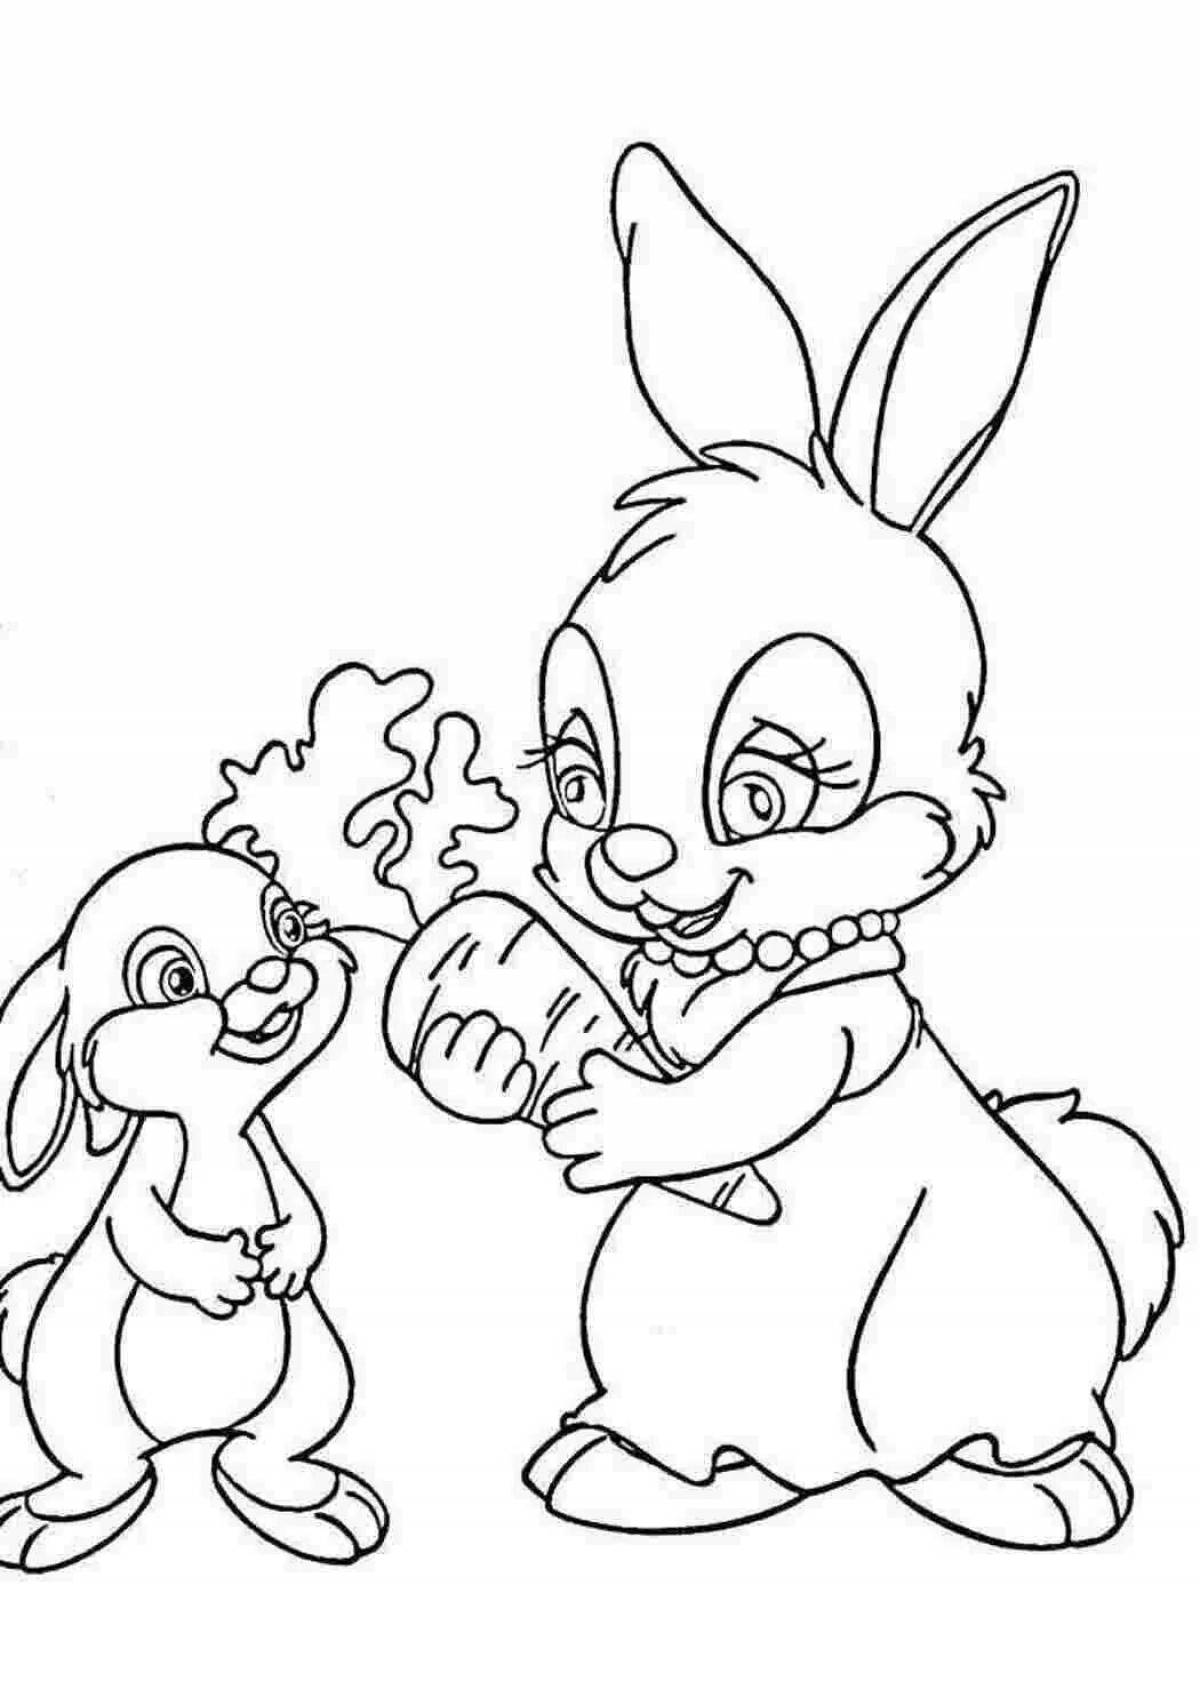 Radiant hare and squirrel coloring page